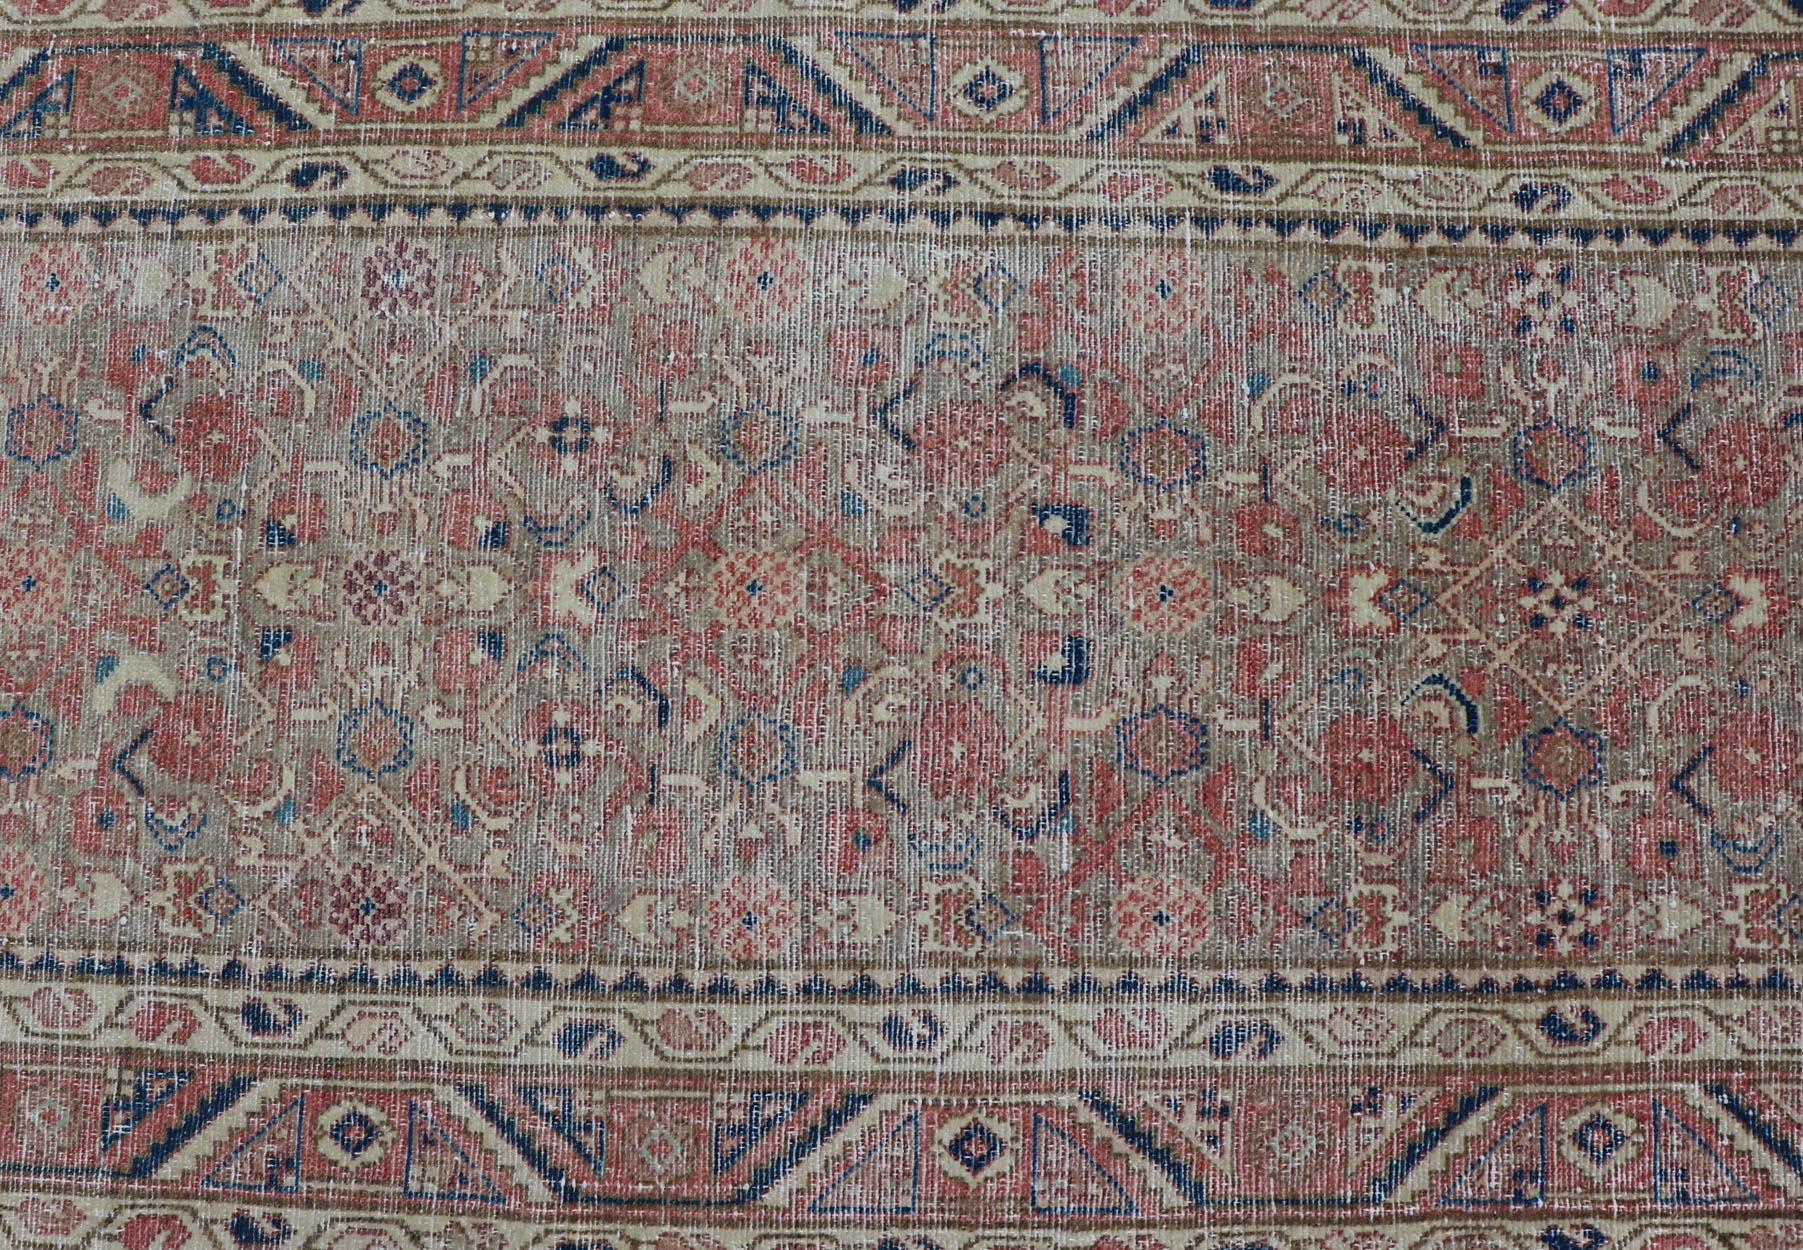 Antique Persian Malayer Runner in Tones of Blue, Salmon, Cream, and Tans For Sale 1